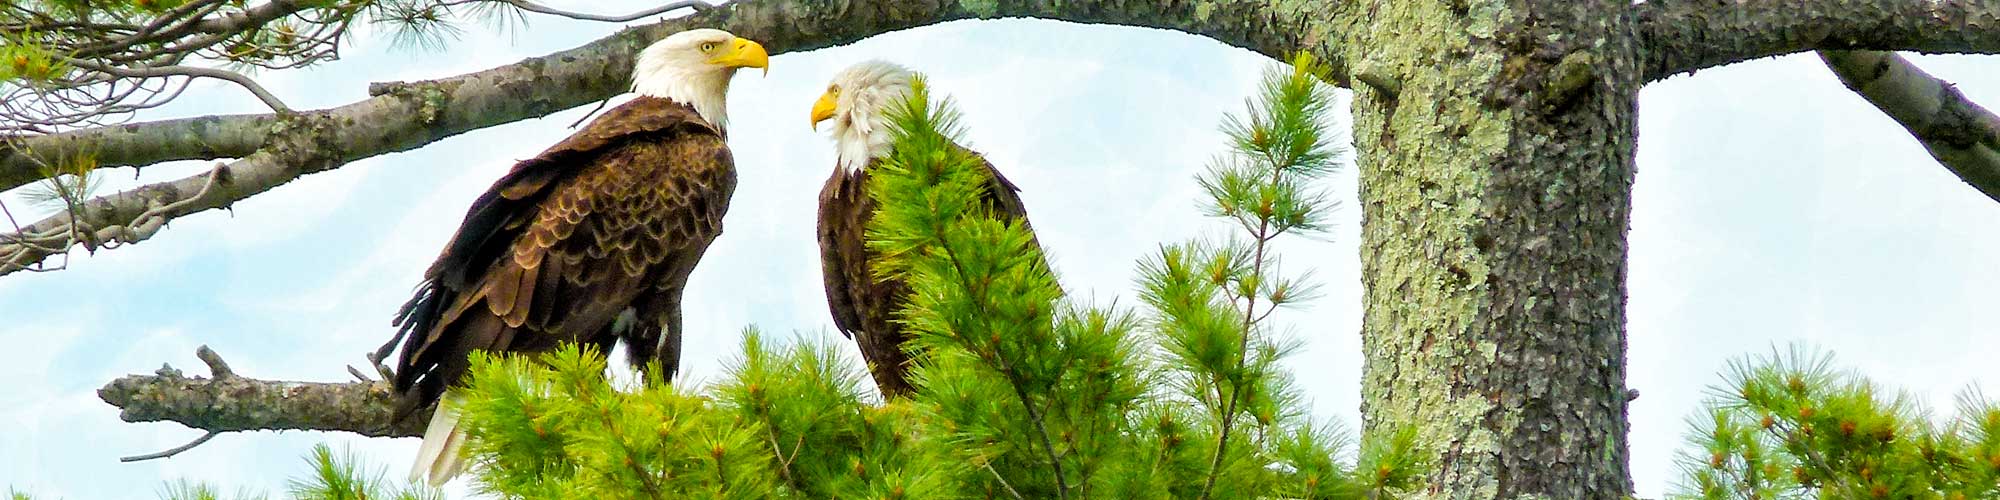 Two adult Bald Eagles perched in a tree